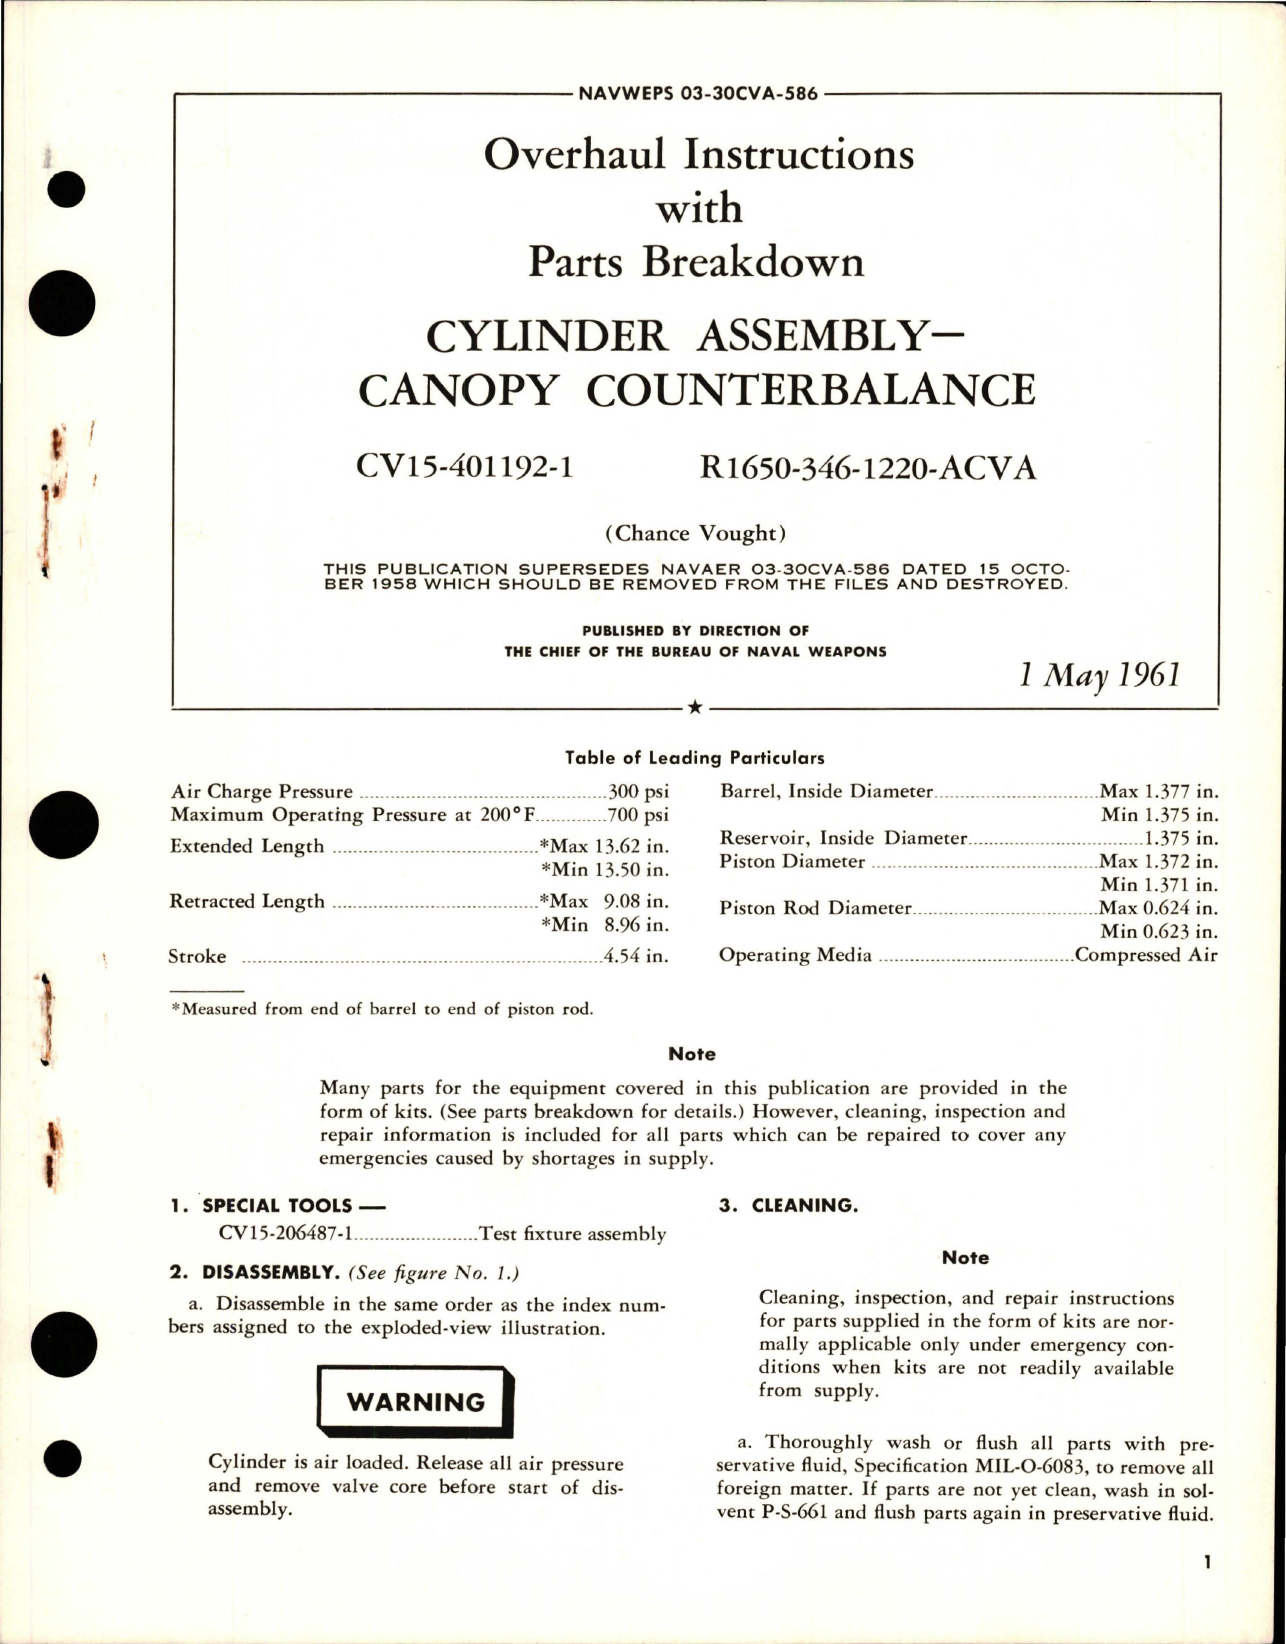 Sample page 1 from AirCorps Library document: Overhaul Instructions with Parts Breakdown for Canopy Counterbalance Cylinder Assembly - CV15-401192-1